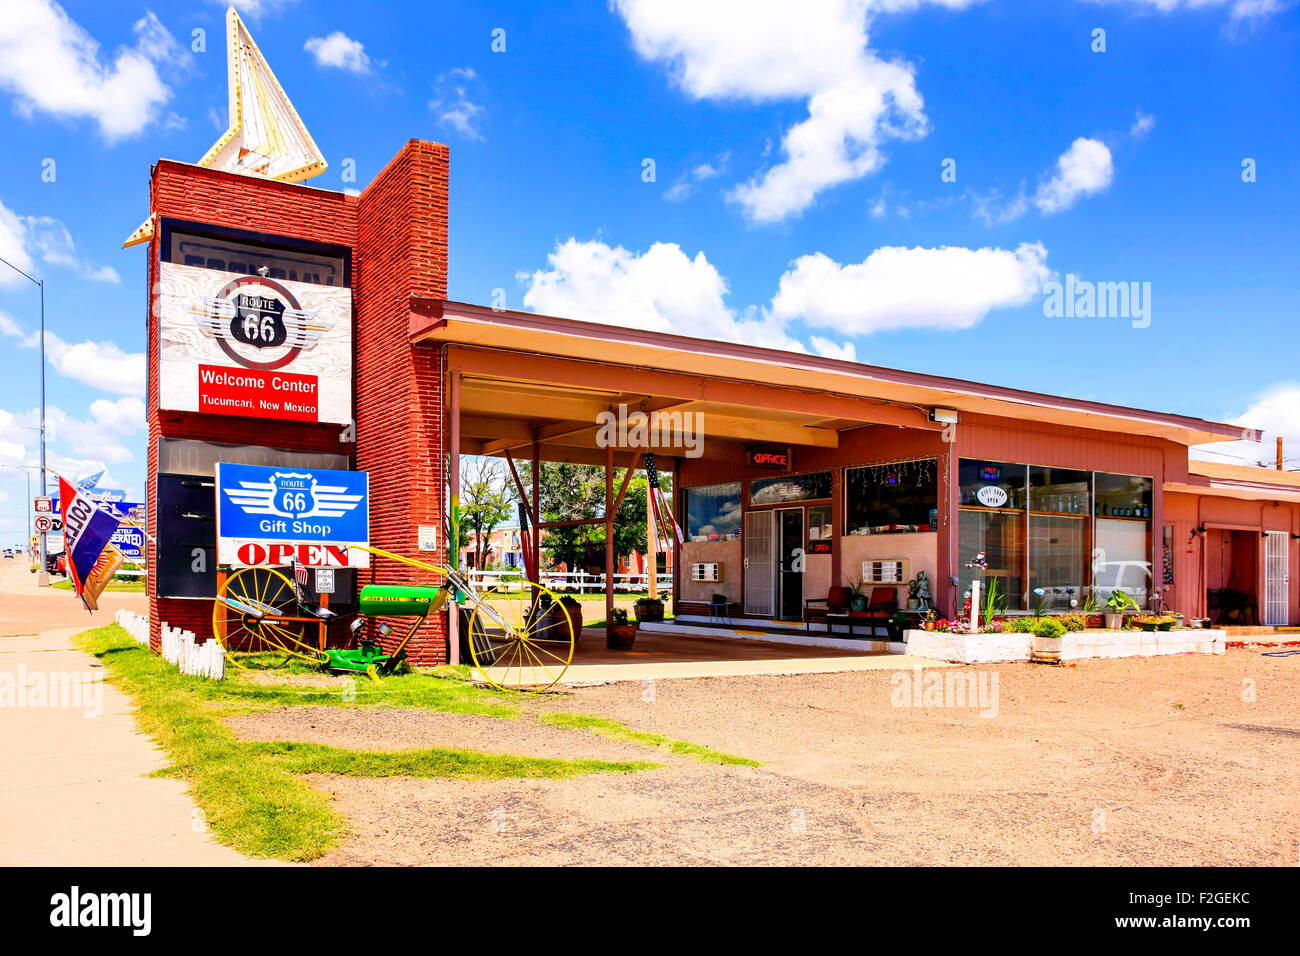 Route 66 Welcome Center and Gift Shop in Tucumcari, New Mexico Stock Photo